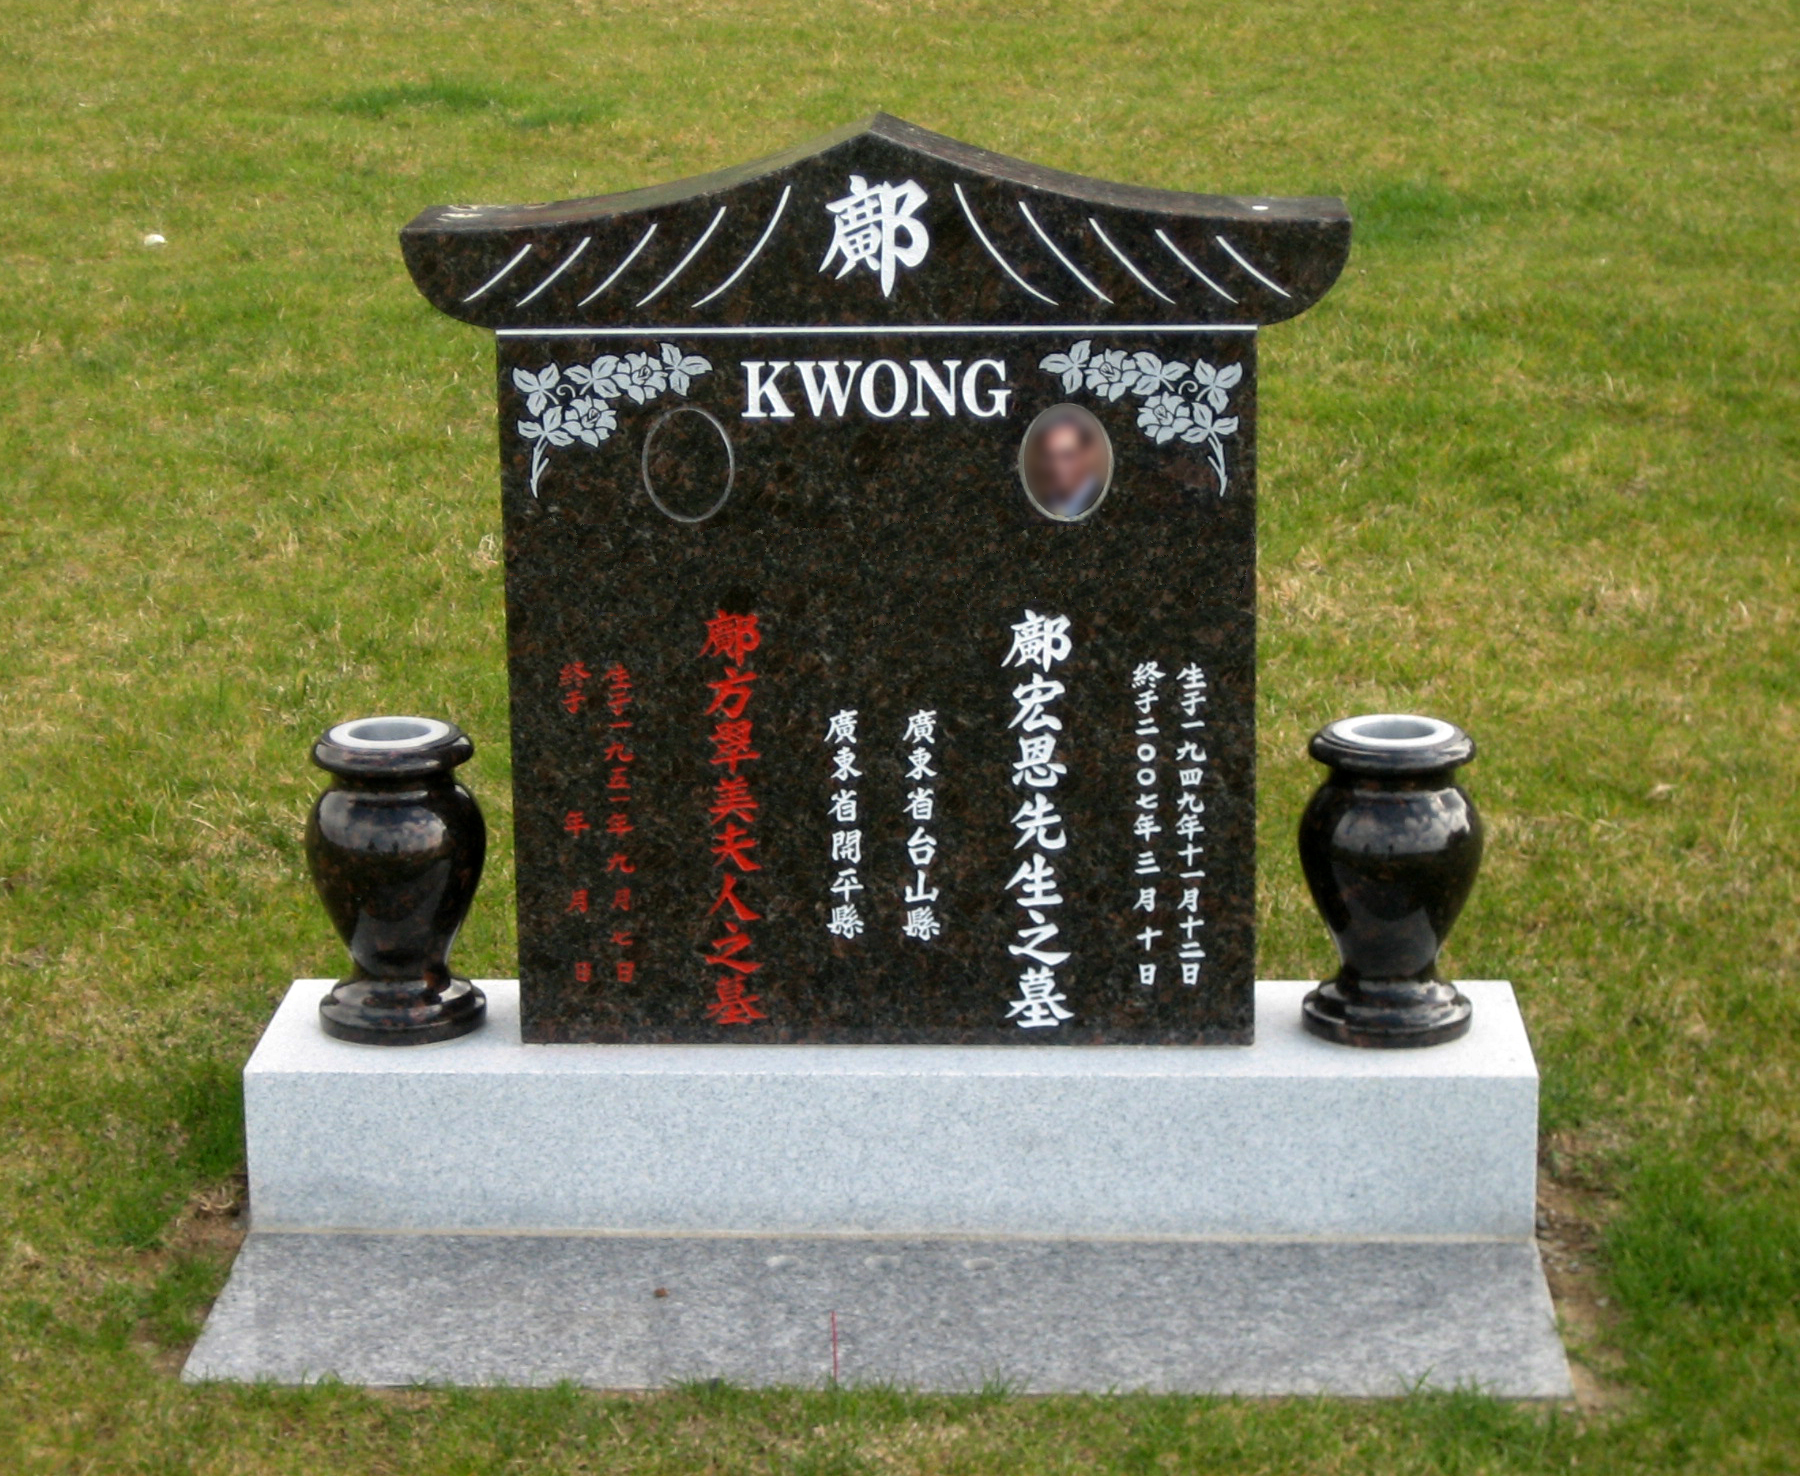 Black tombstone with white and red engravings and incense holders on either side